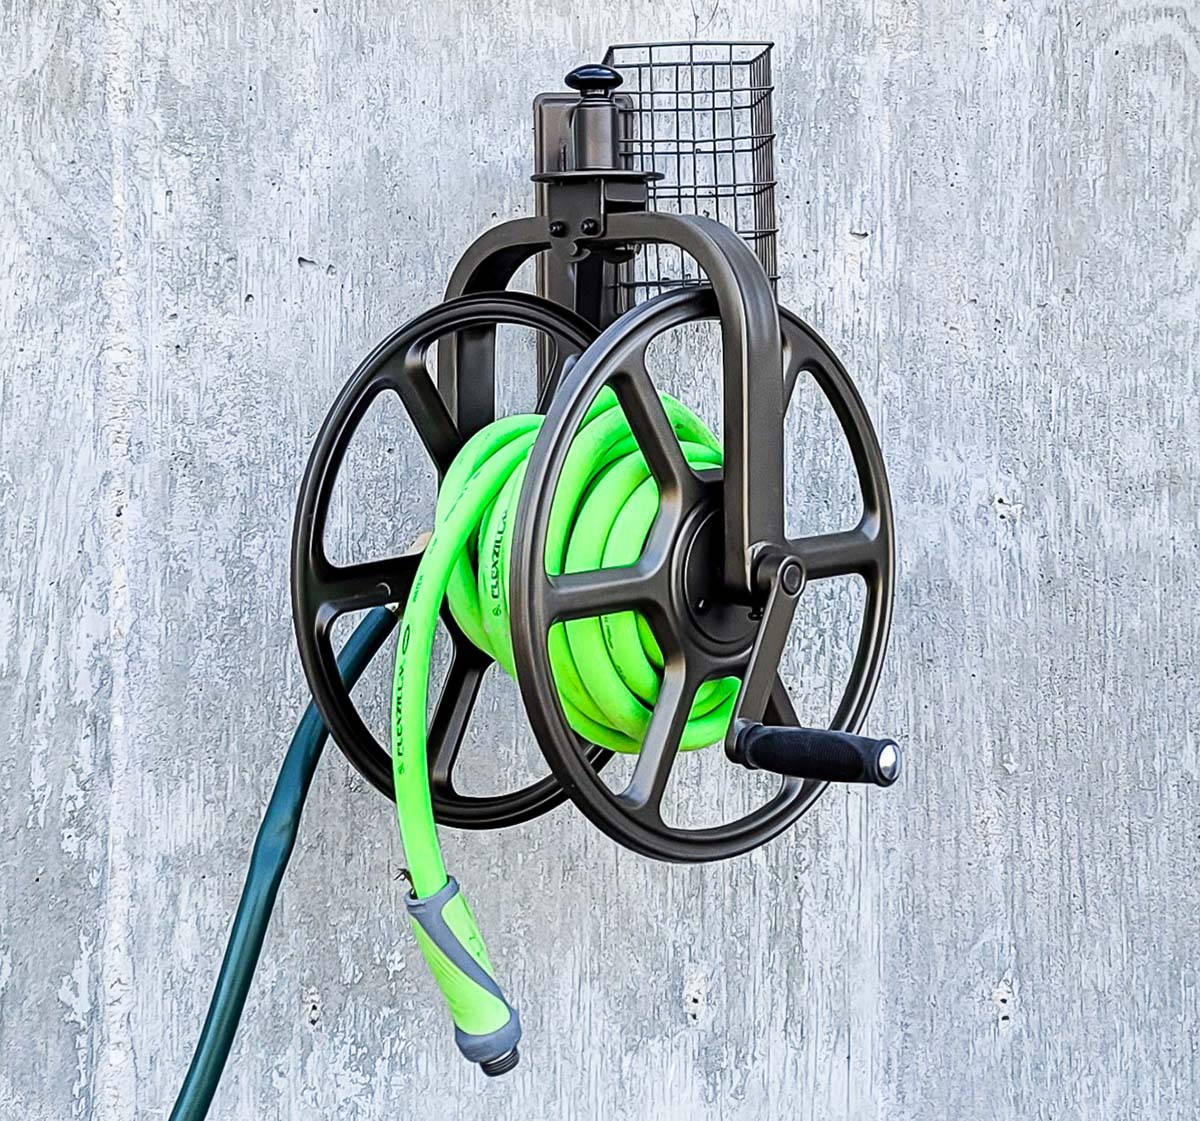 Navigator Hose Reel from Liberty Products: Review